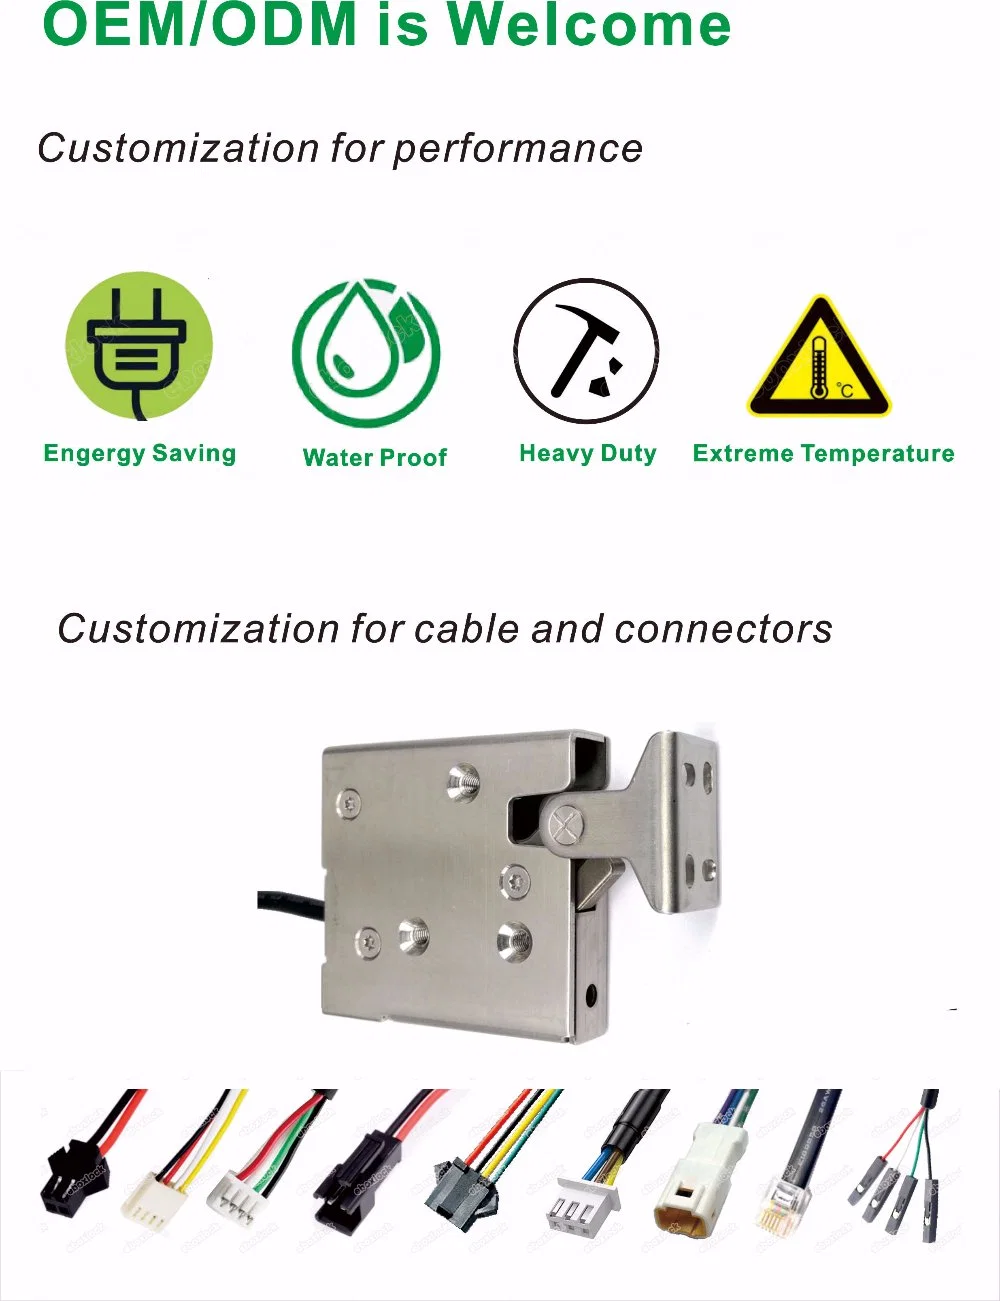 24VDC Electromagnetic Lock for Parcel Delivery and Pickup Lockers